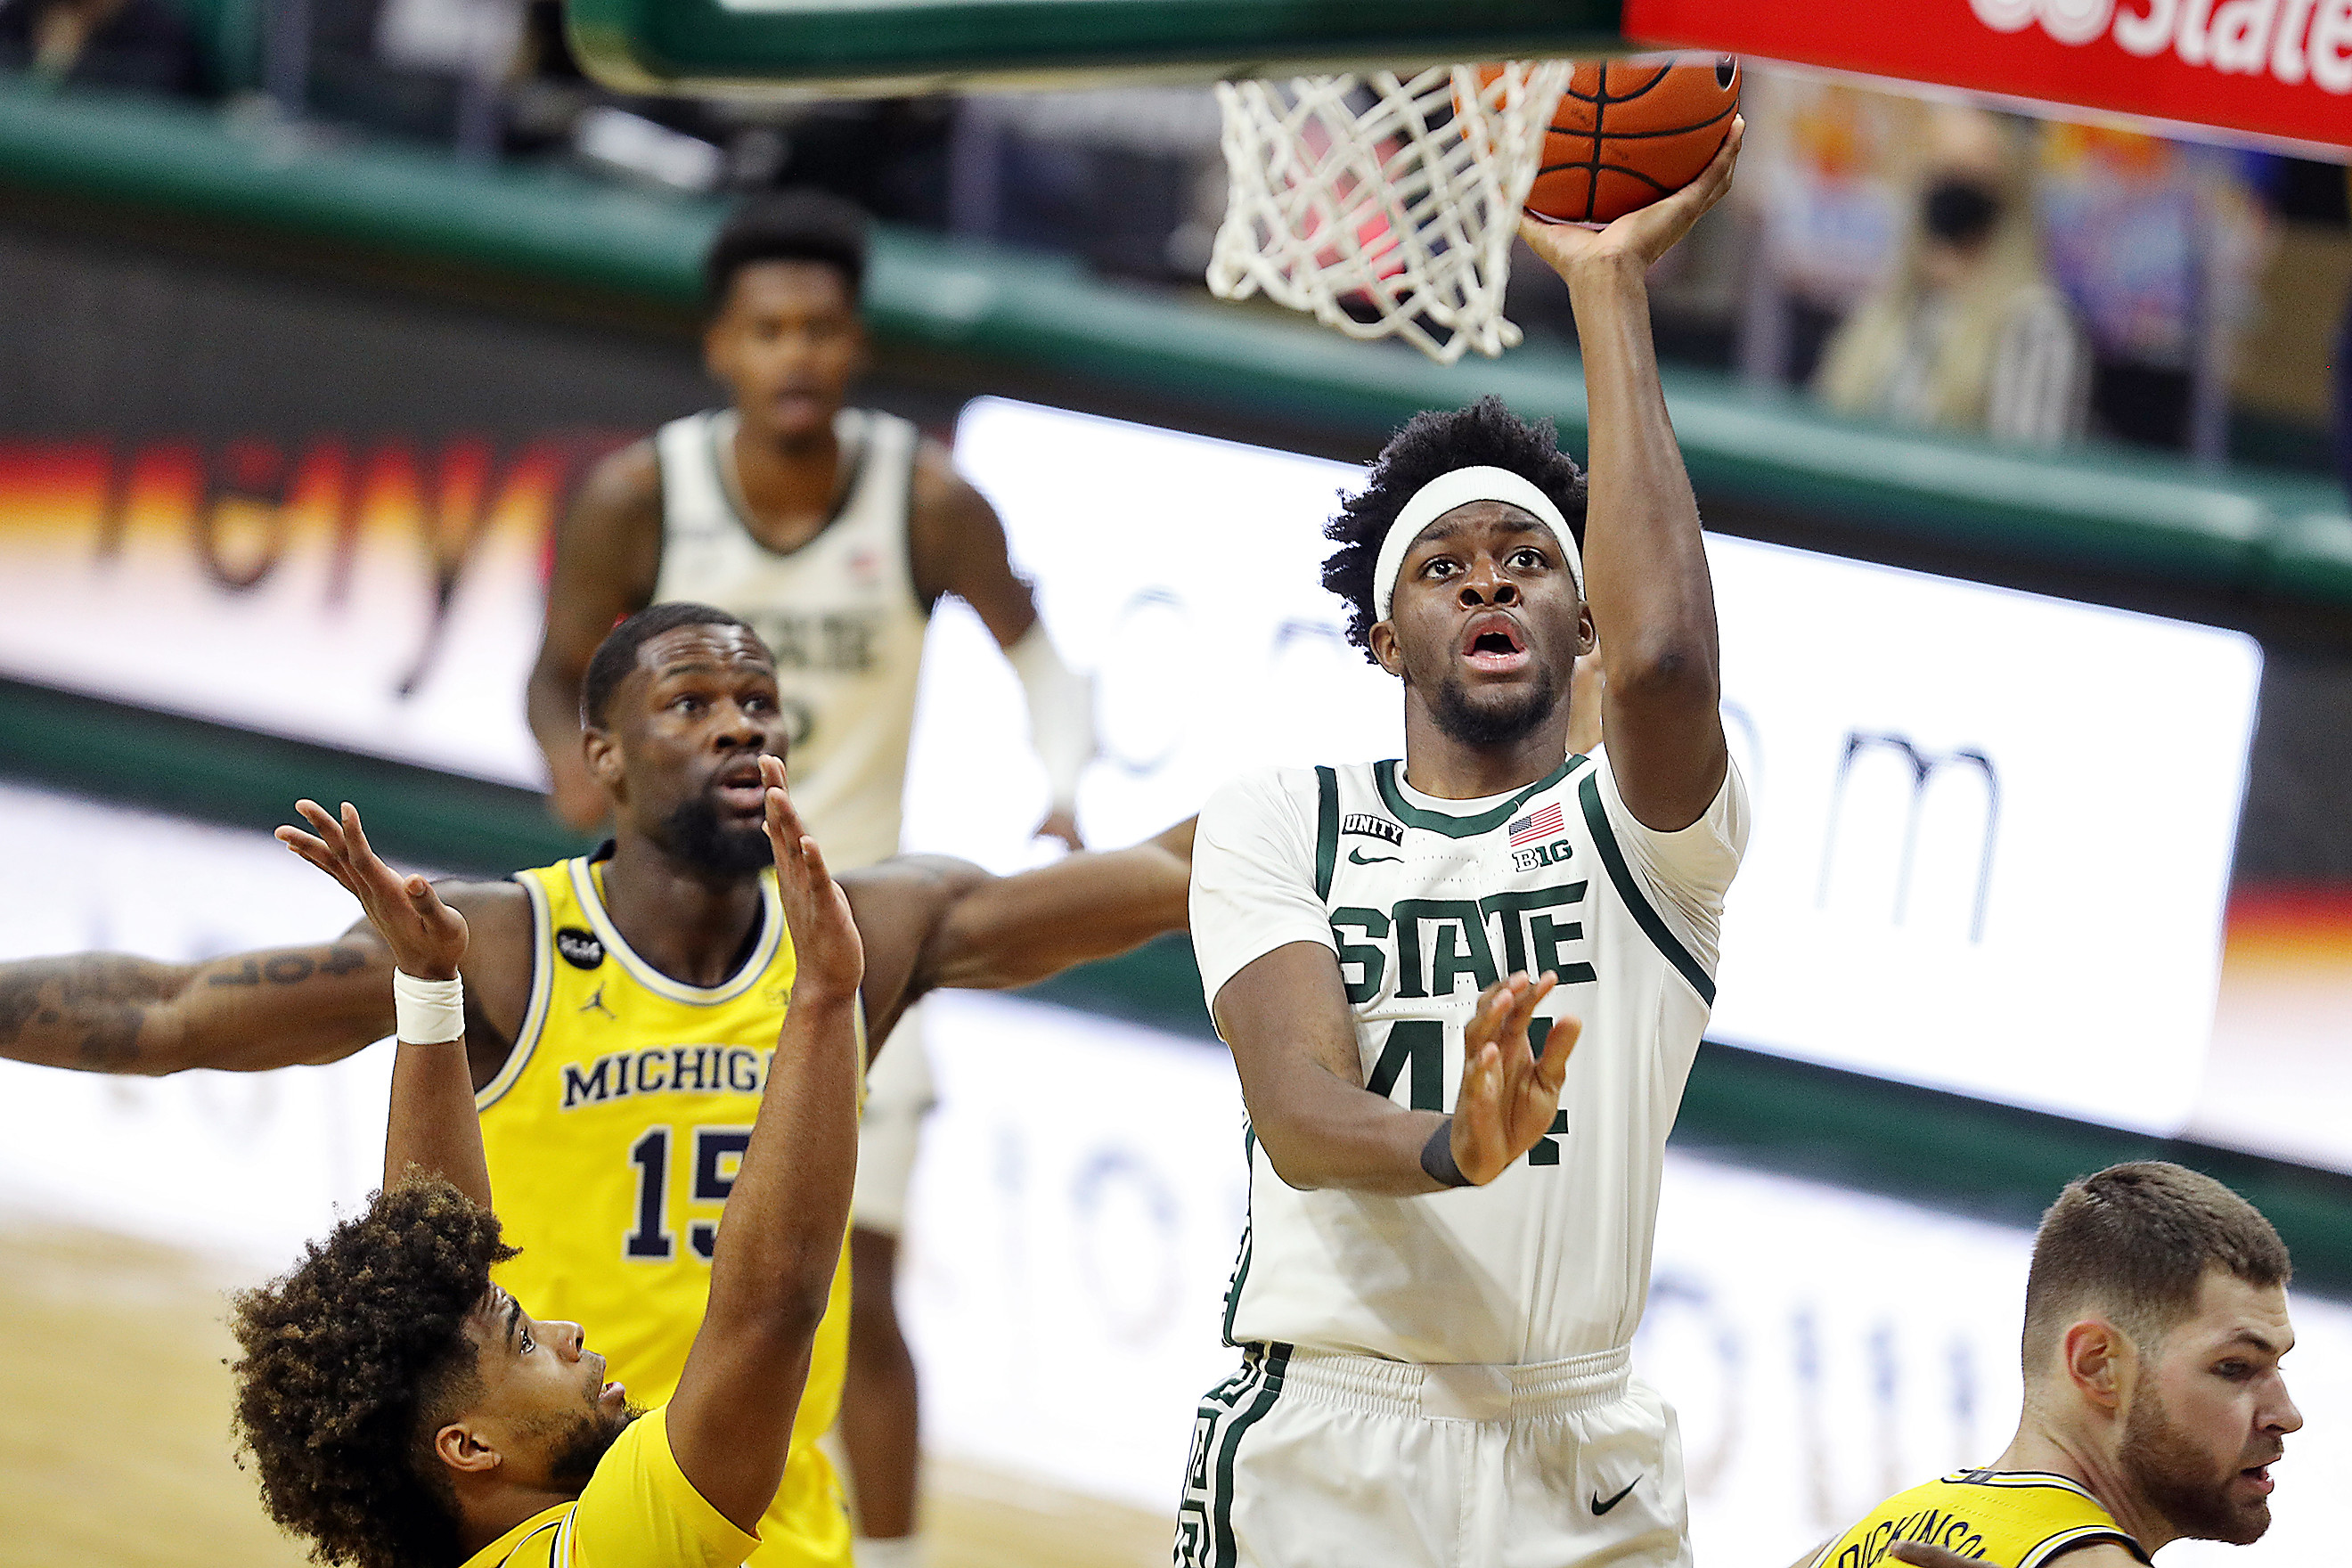 Msu Basketball Schedule 2022 23 What We Know About Michigan State's Schedule In 2021-22 - Mlive.com